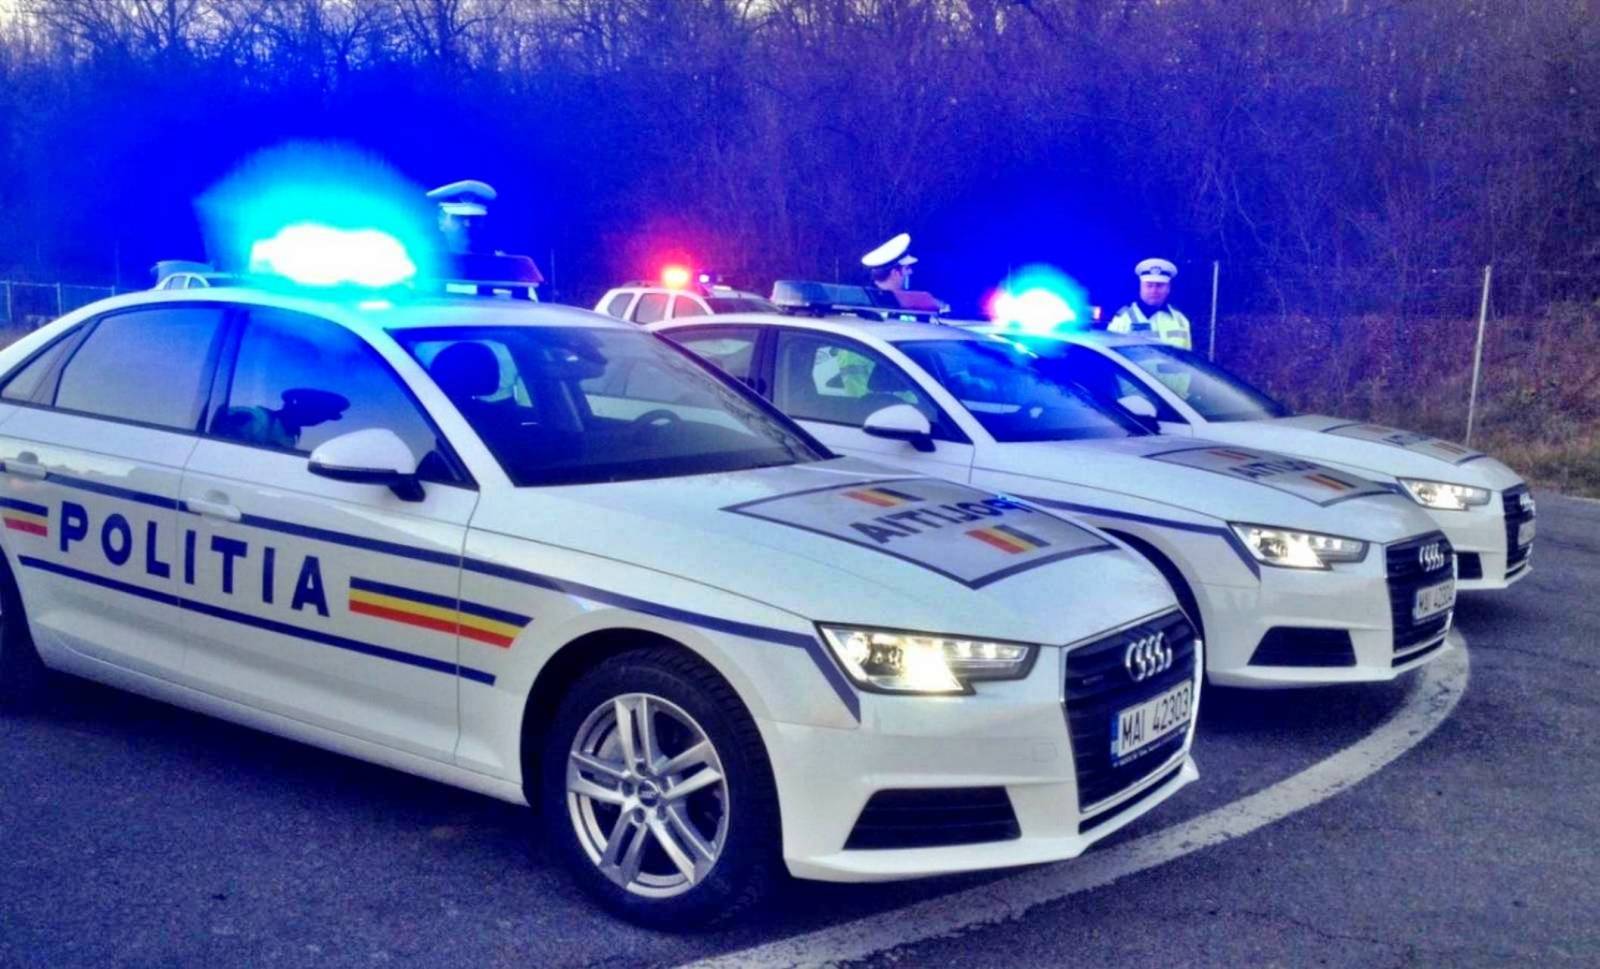 The Romanian Police Continues Traffic Raids, Detecting Drug Consumption